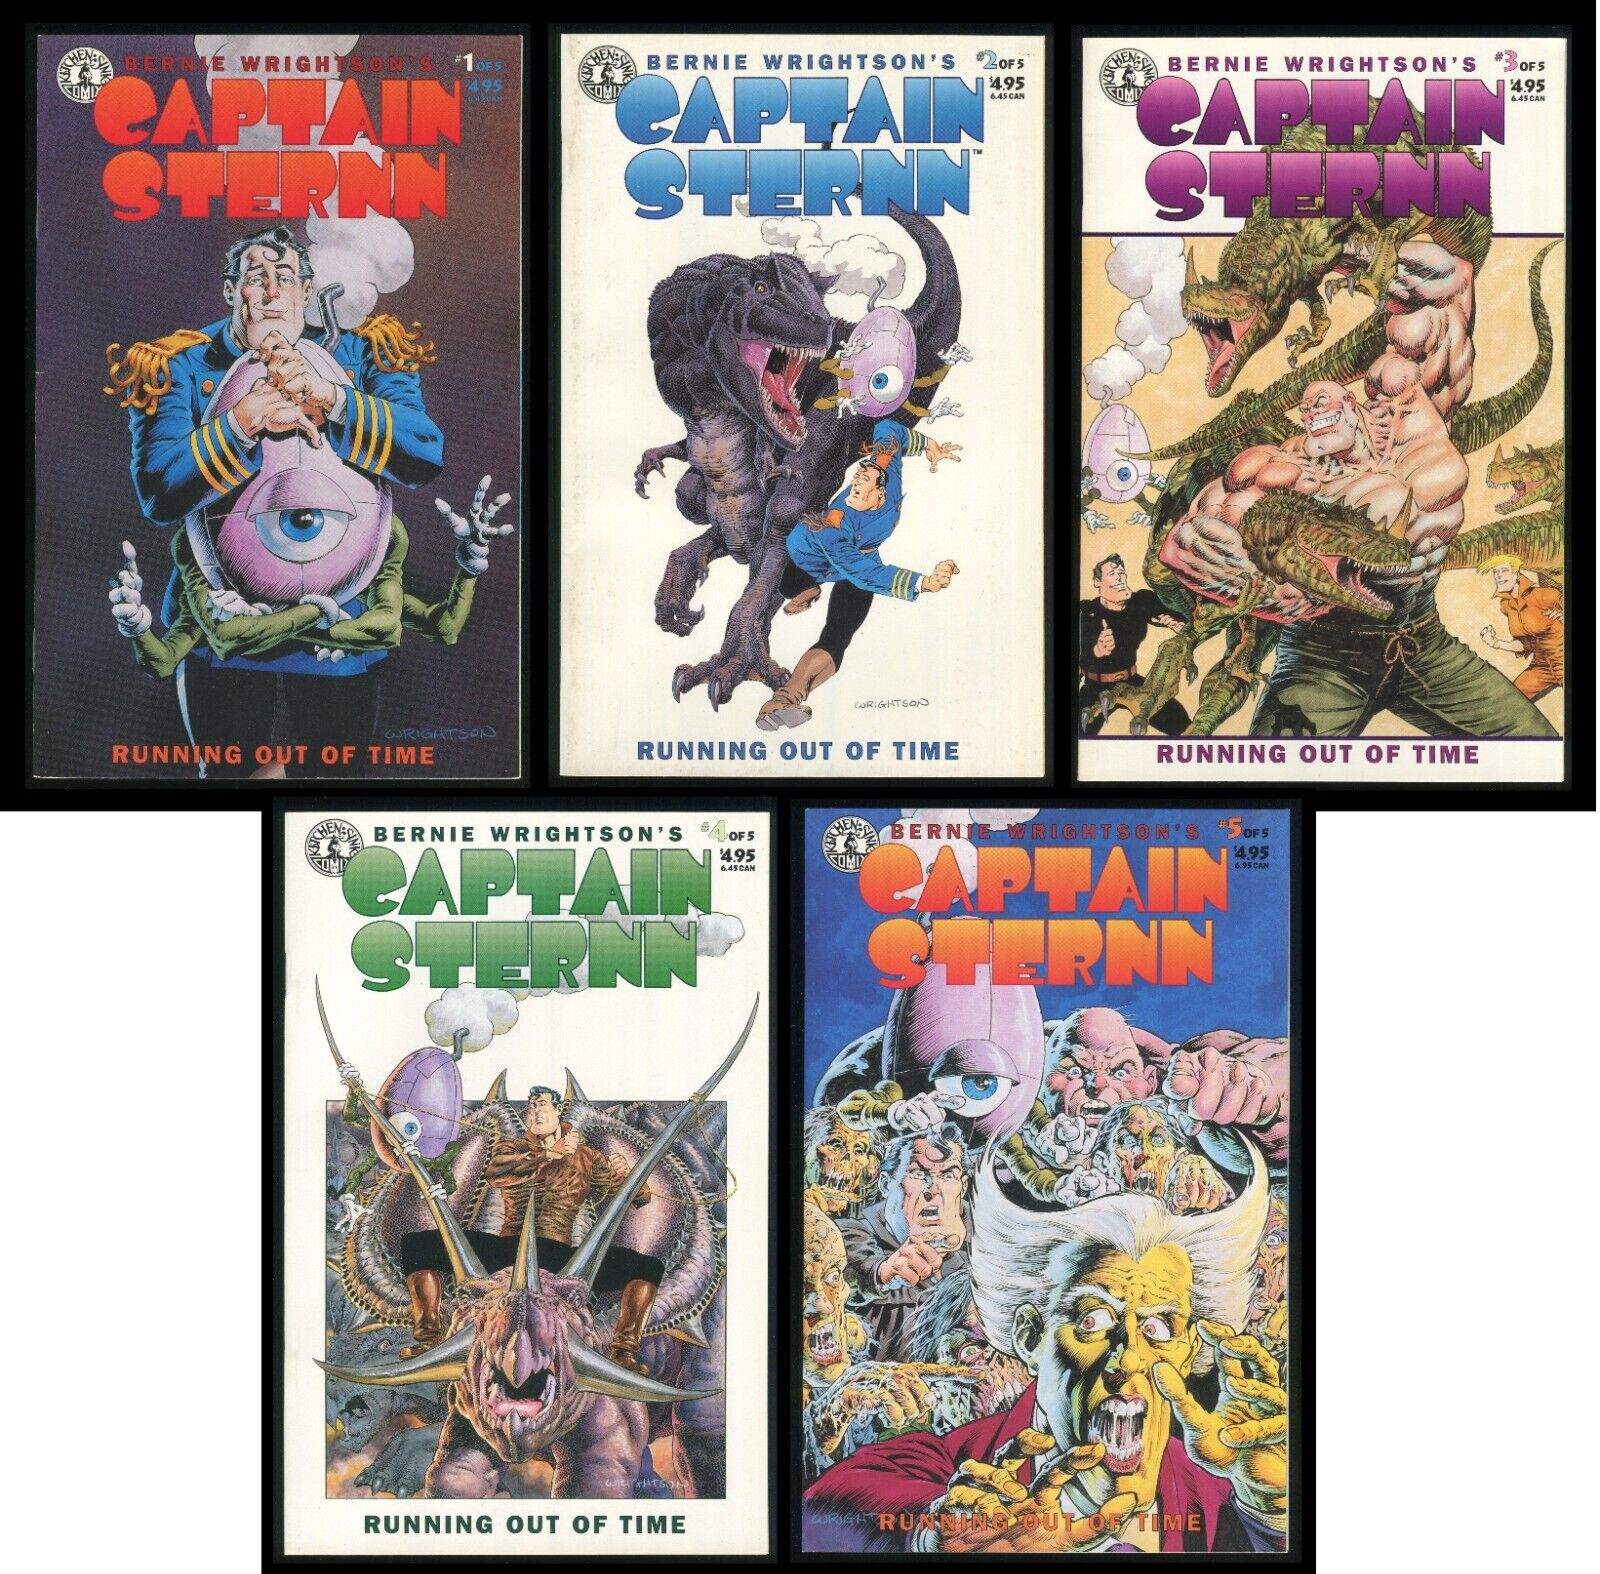 Bernie Wrightson's Captain Sternn Running Out of Time Comic Set 1-2-3-4-5 Lot 